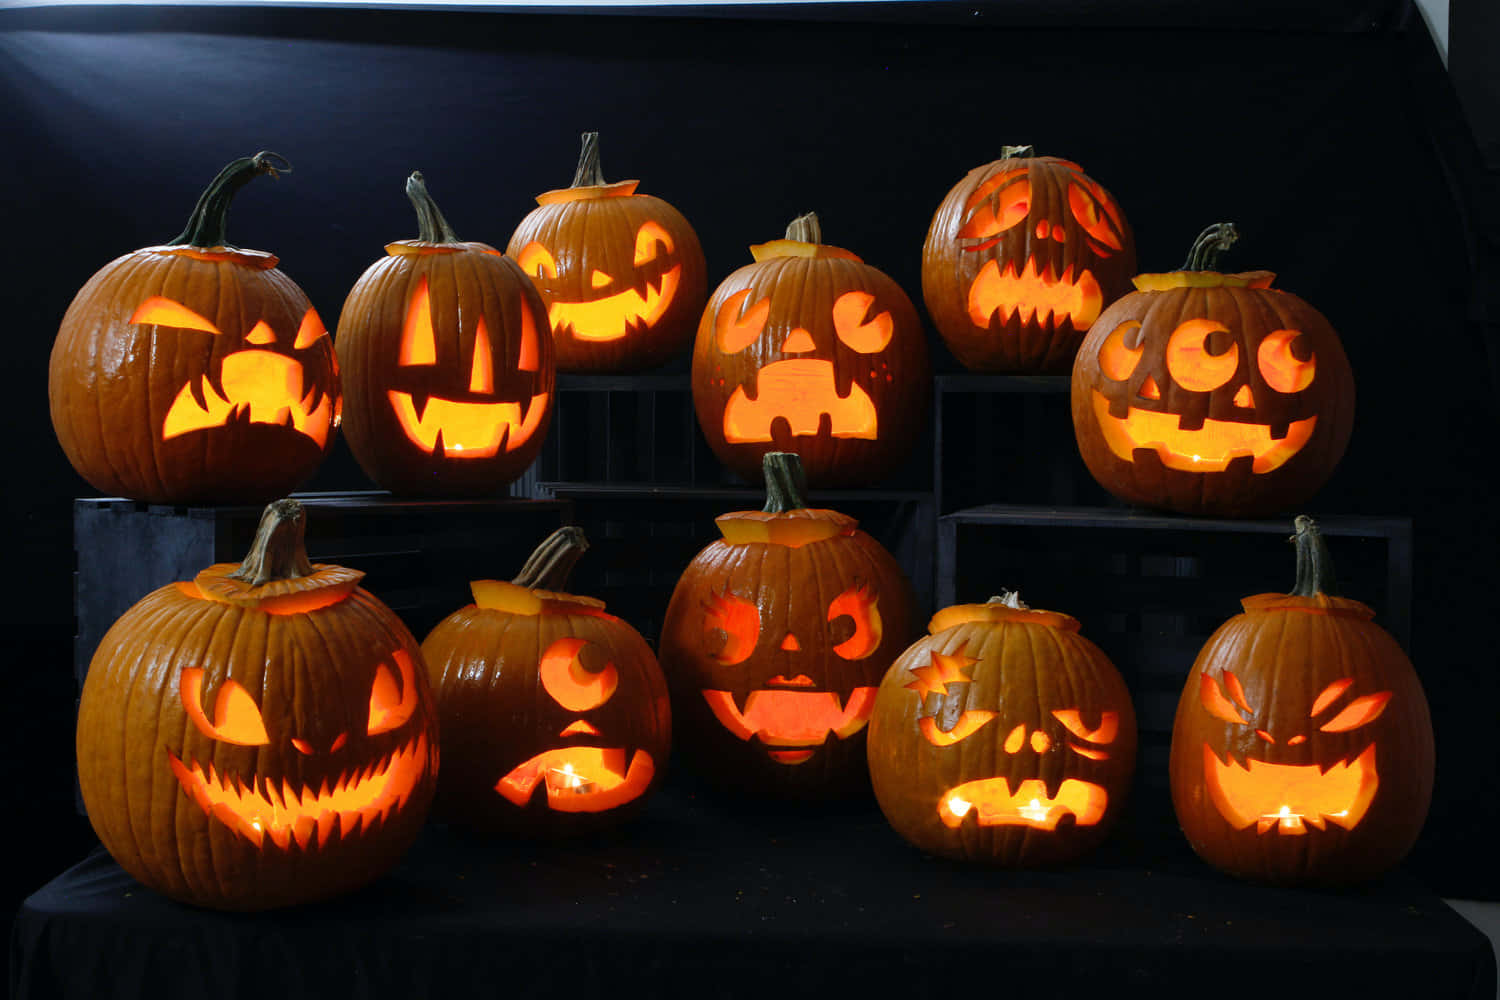 A Group Of Pumpkins With Faces